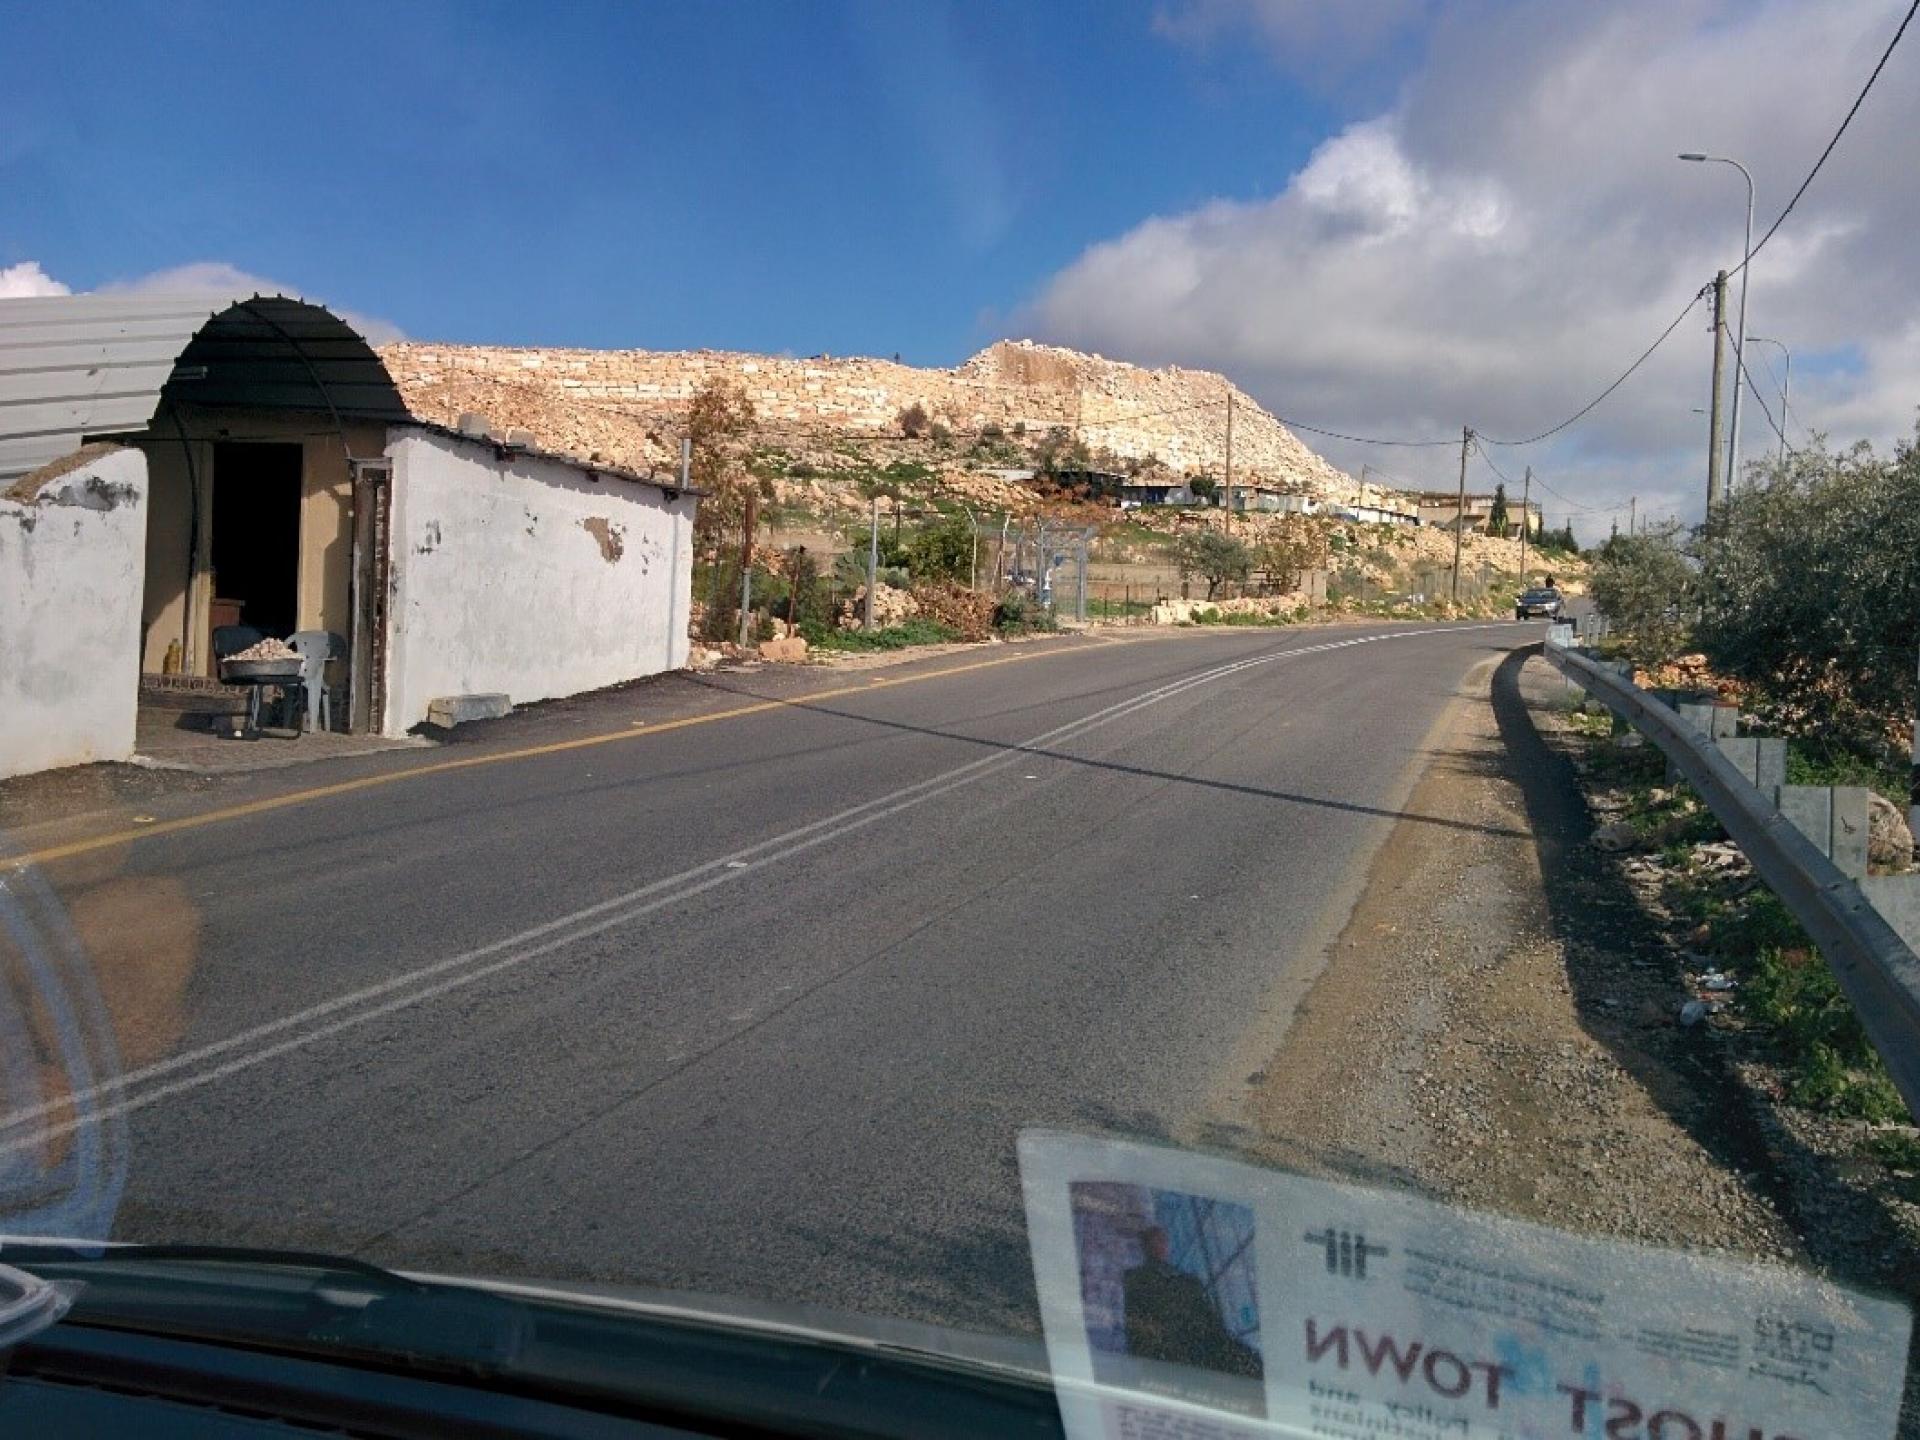 Road 446: the entrance to the family shop against the background of the Leshem Fort wall nearly completed